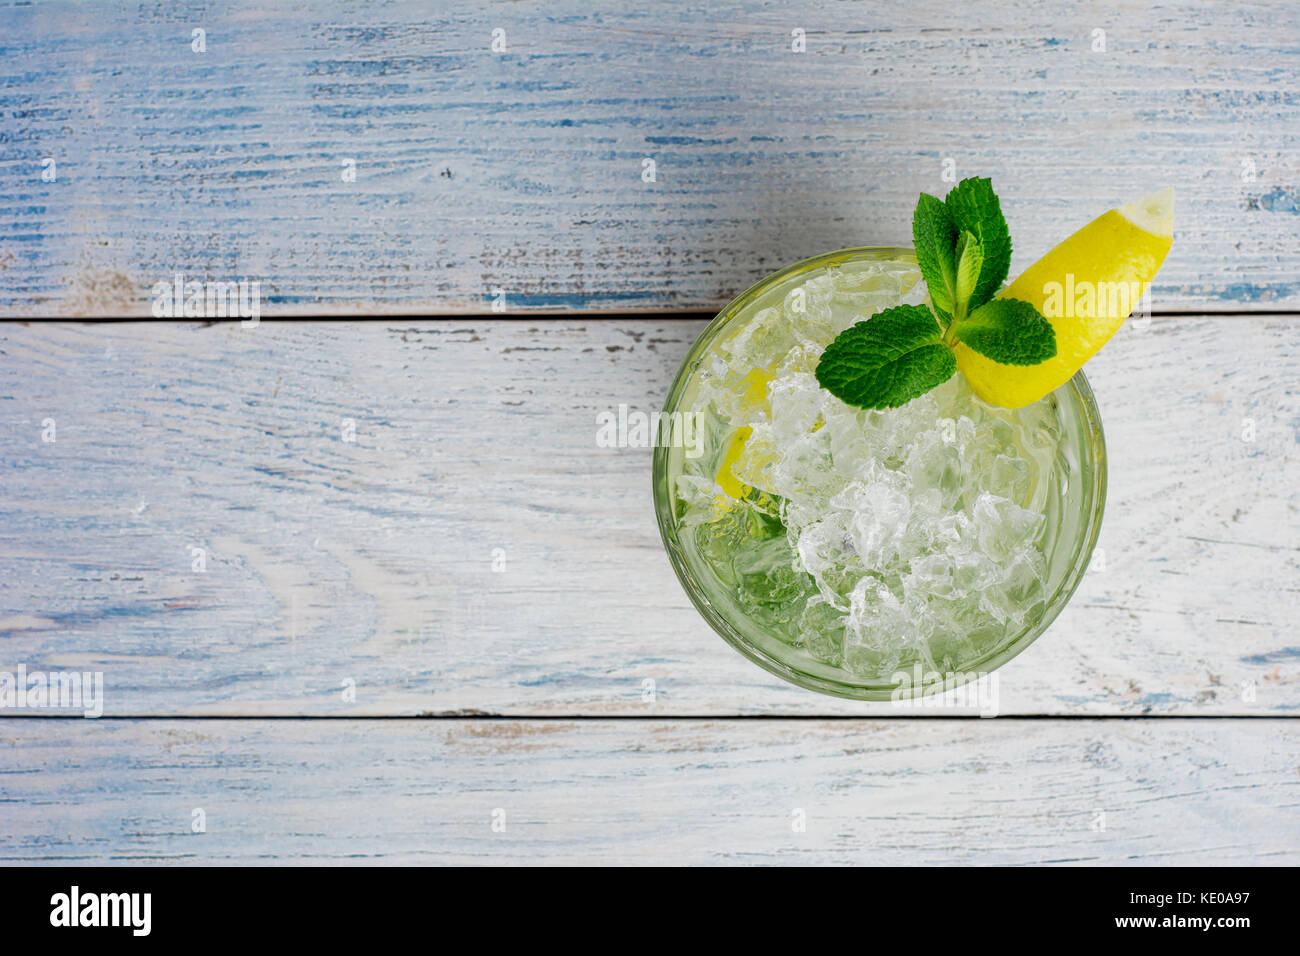 Alcohol mojito cocktil bar long drink fresh tropical beverage top view copy space highball glass, with rum, spearmint, lime juice, soda water and ice on white concrete table. Stock Photo